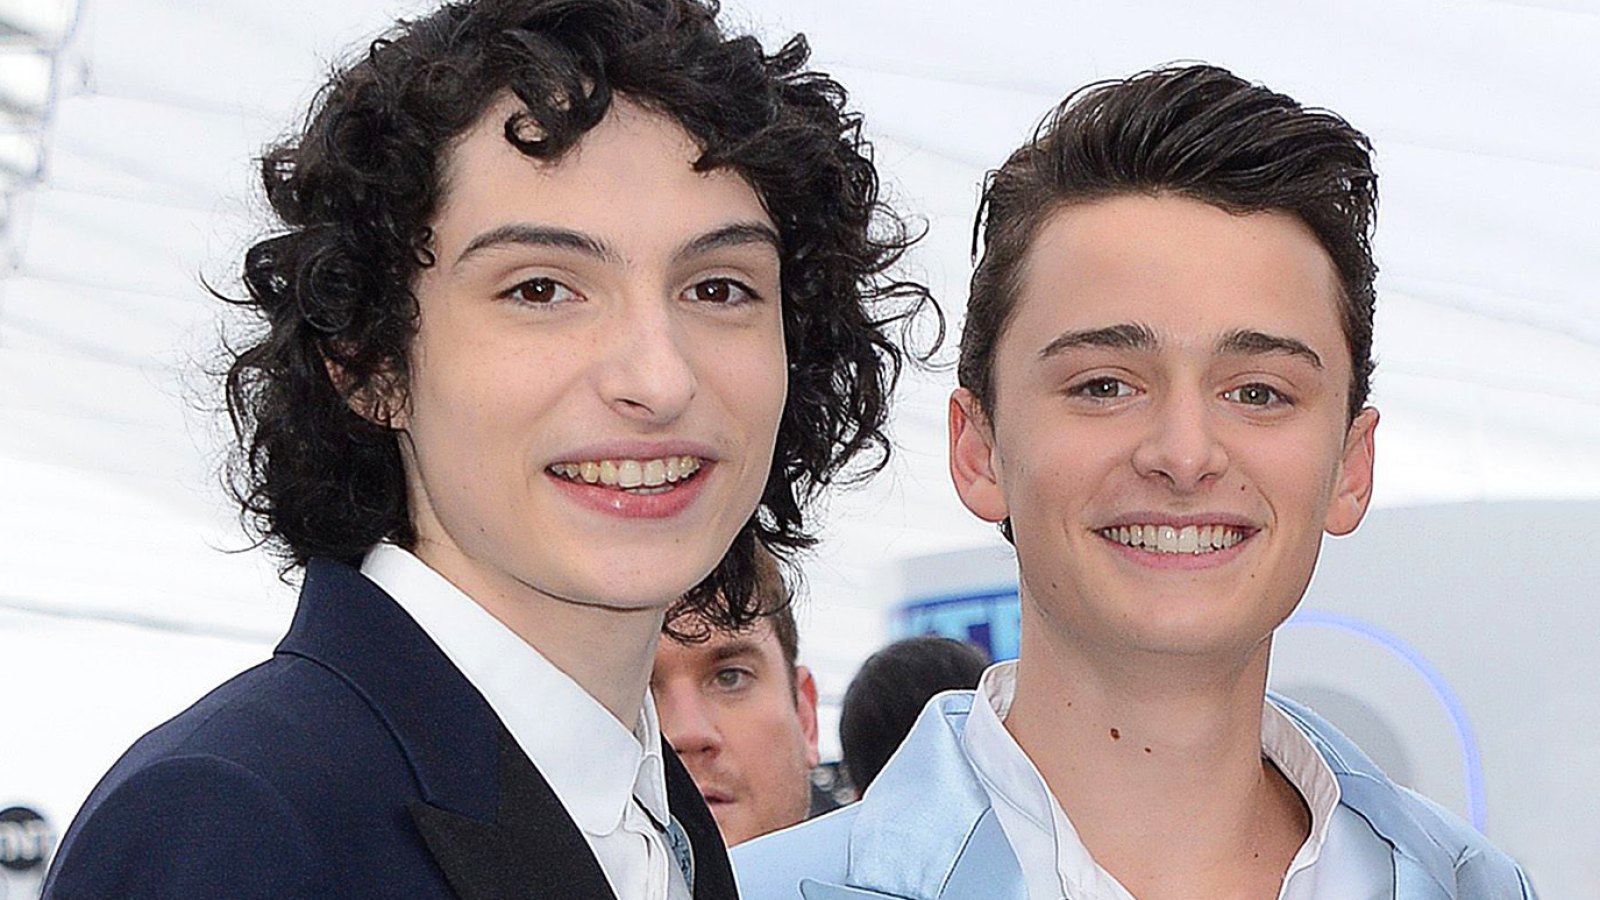 Finn Wolfhard Is ‘Really Proud’ of ‘Stranger Things’ Costar Noah Schnapp Coming Out -266 26th Annual Screen Actors Guild Awards, Arrivals, Shrine Auditorium, Los Angeles, USA - 19 Jan 2020